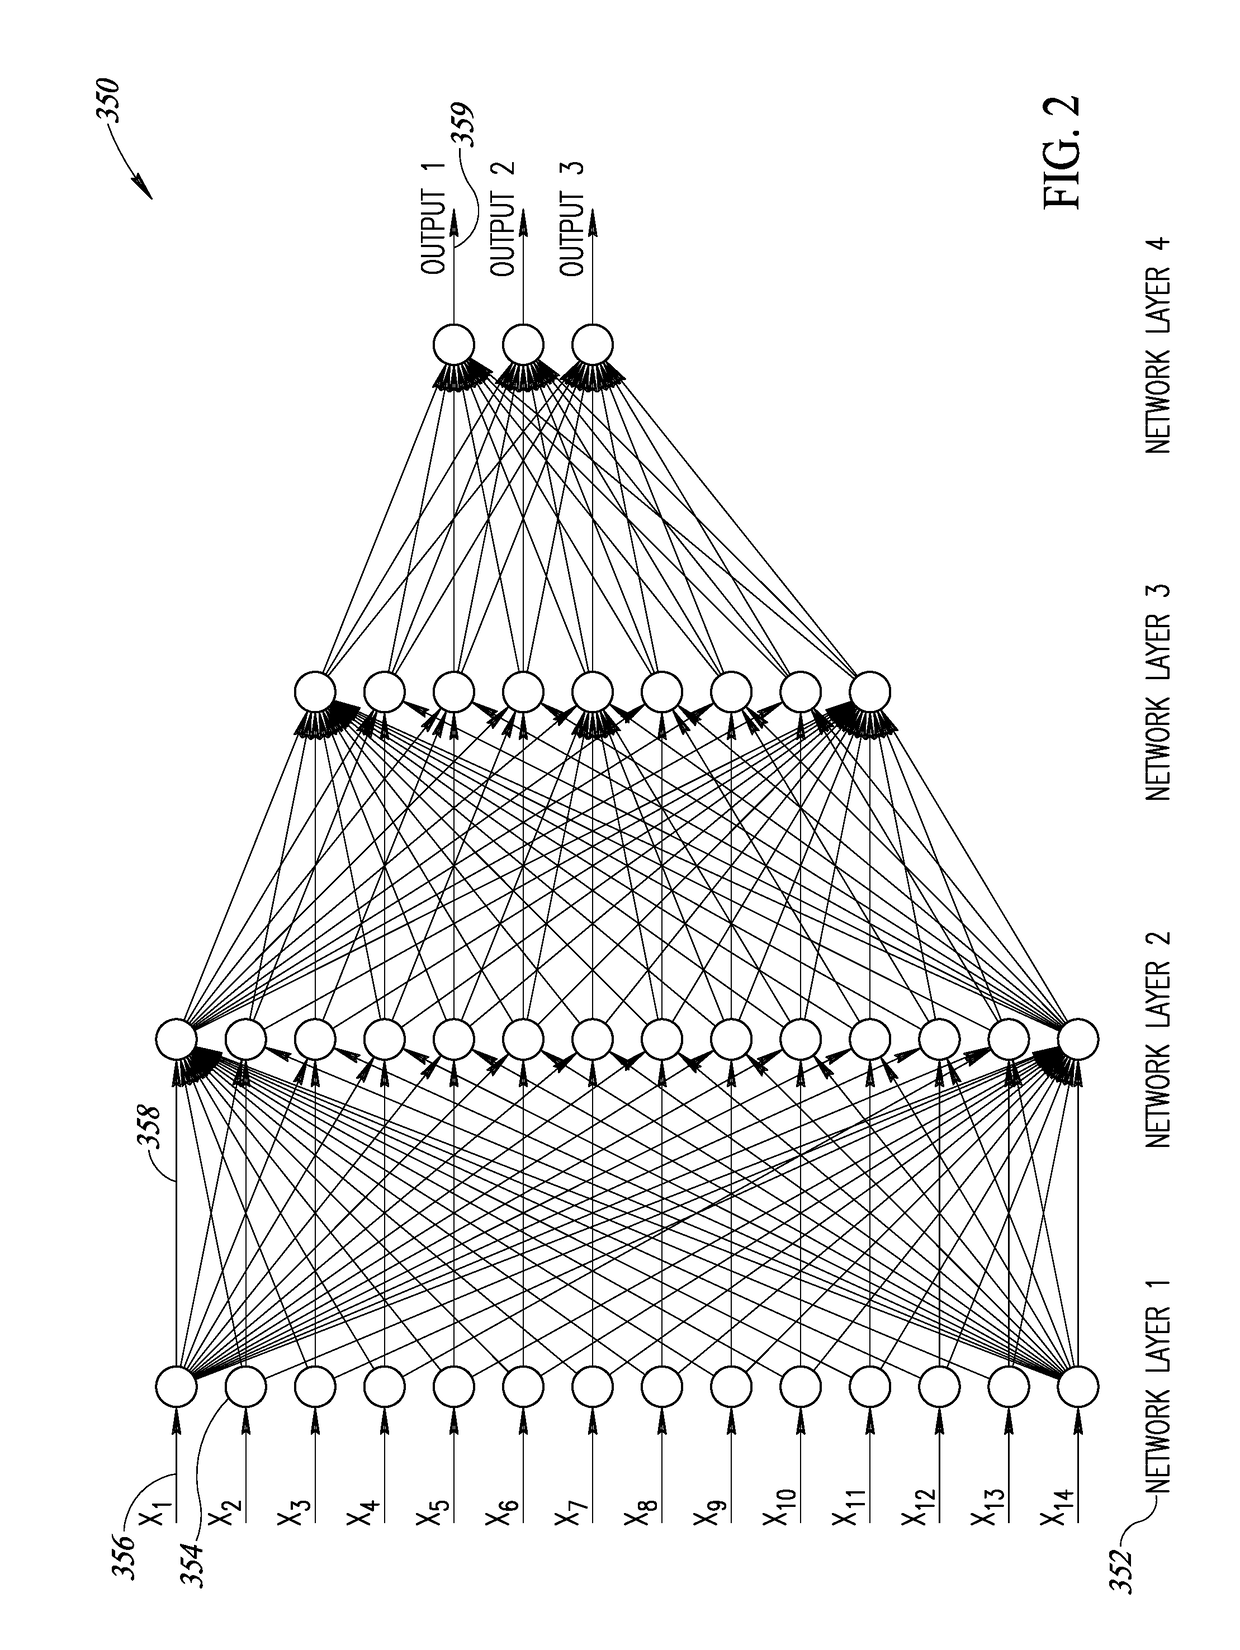 Neural Network Processor Incorporating Separate Control And Data Fabric